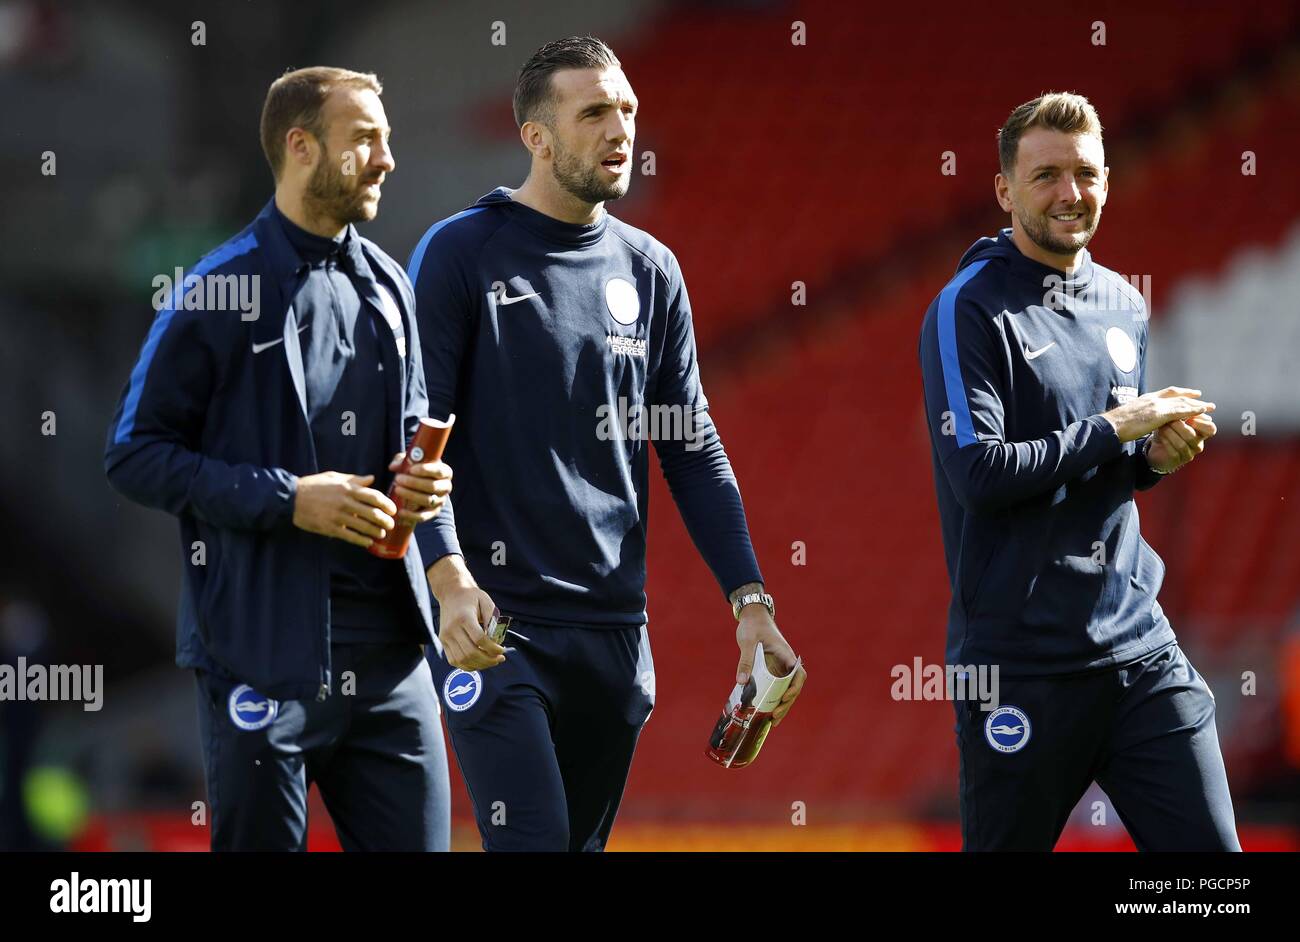 Brighton & Hove Albion's (left to right) Glenn Murray, Shane Duffy and Dale Stephens before the Premier League match at Anfield, Liverpool. Stock Photo